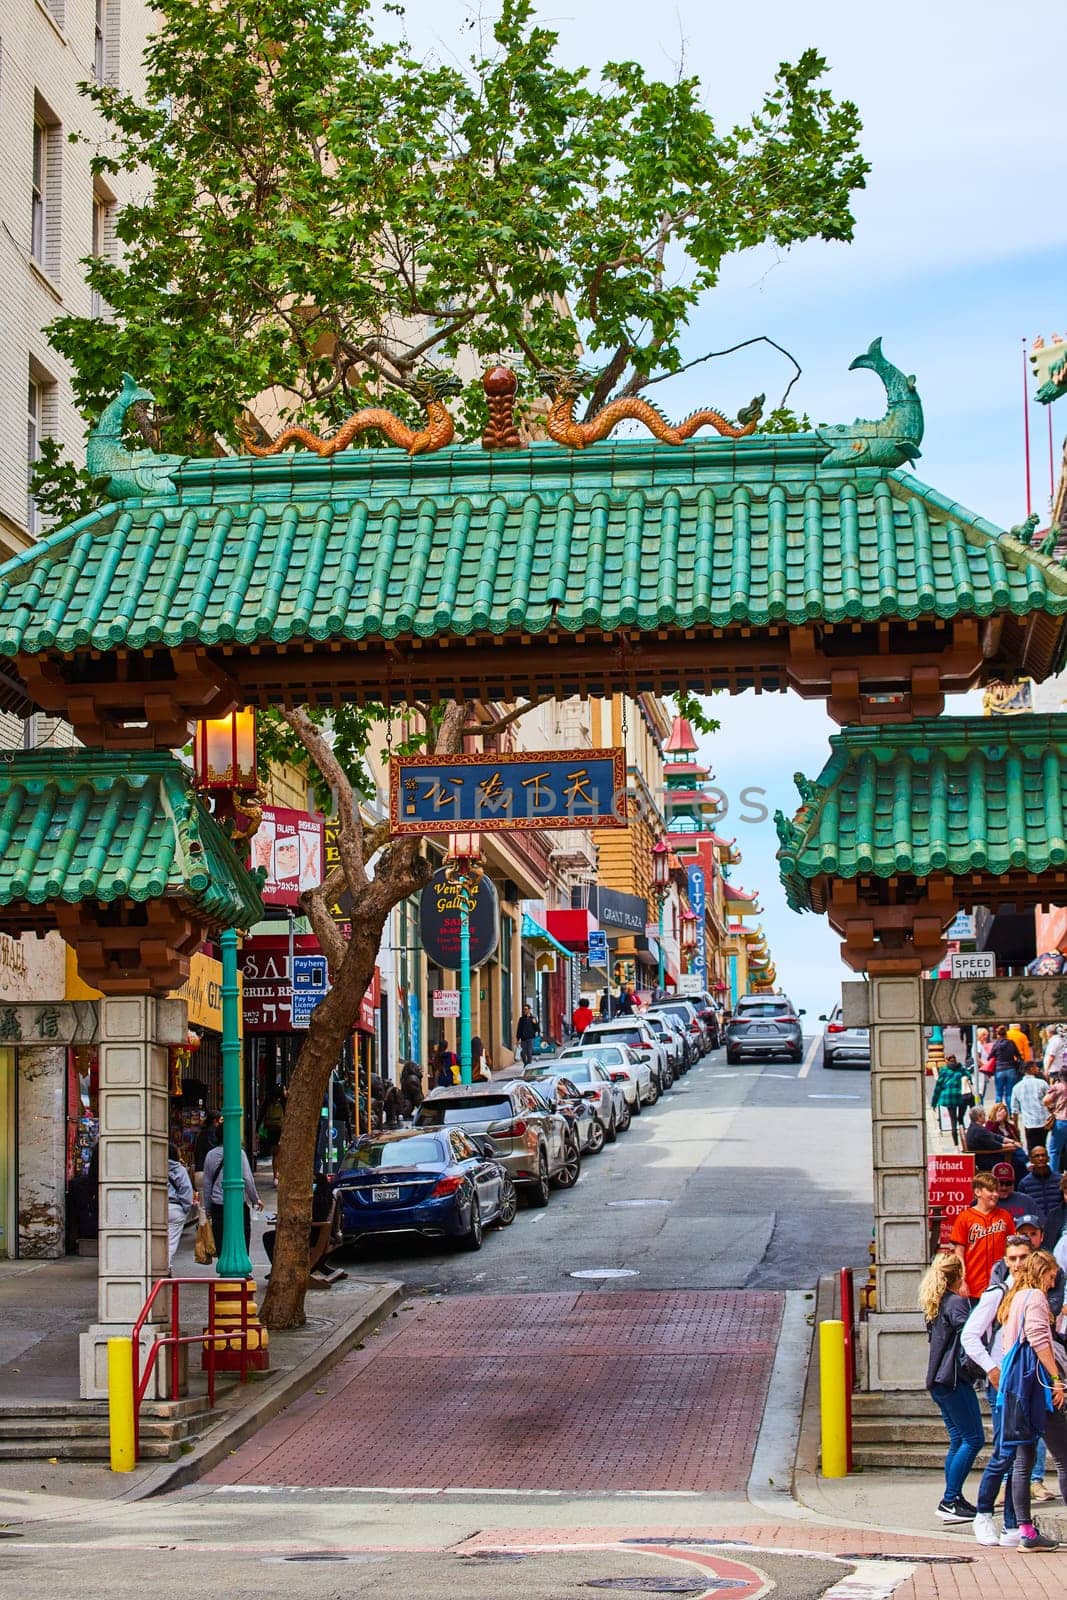 Image of Pedestrians and cars around iconic San Francisco Chinatown entrance with green tree behind it